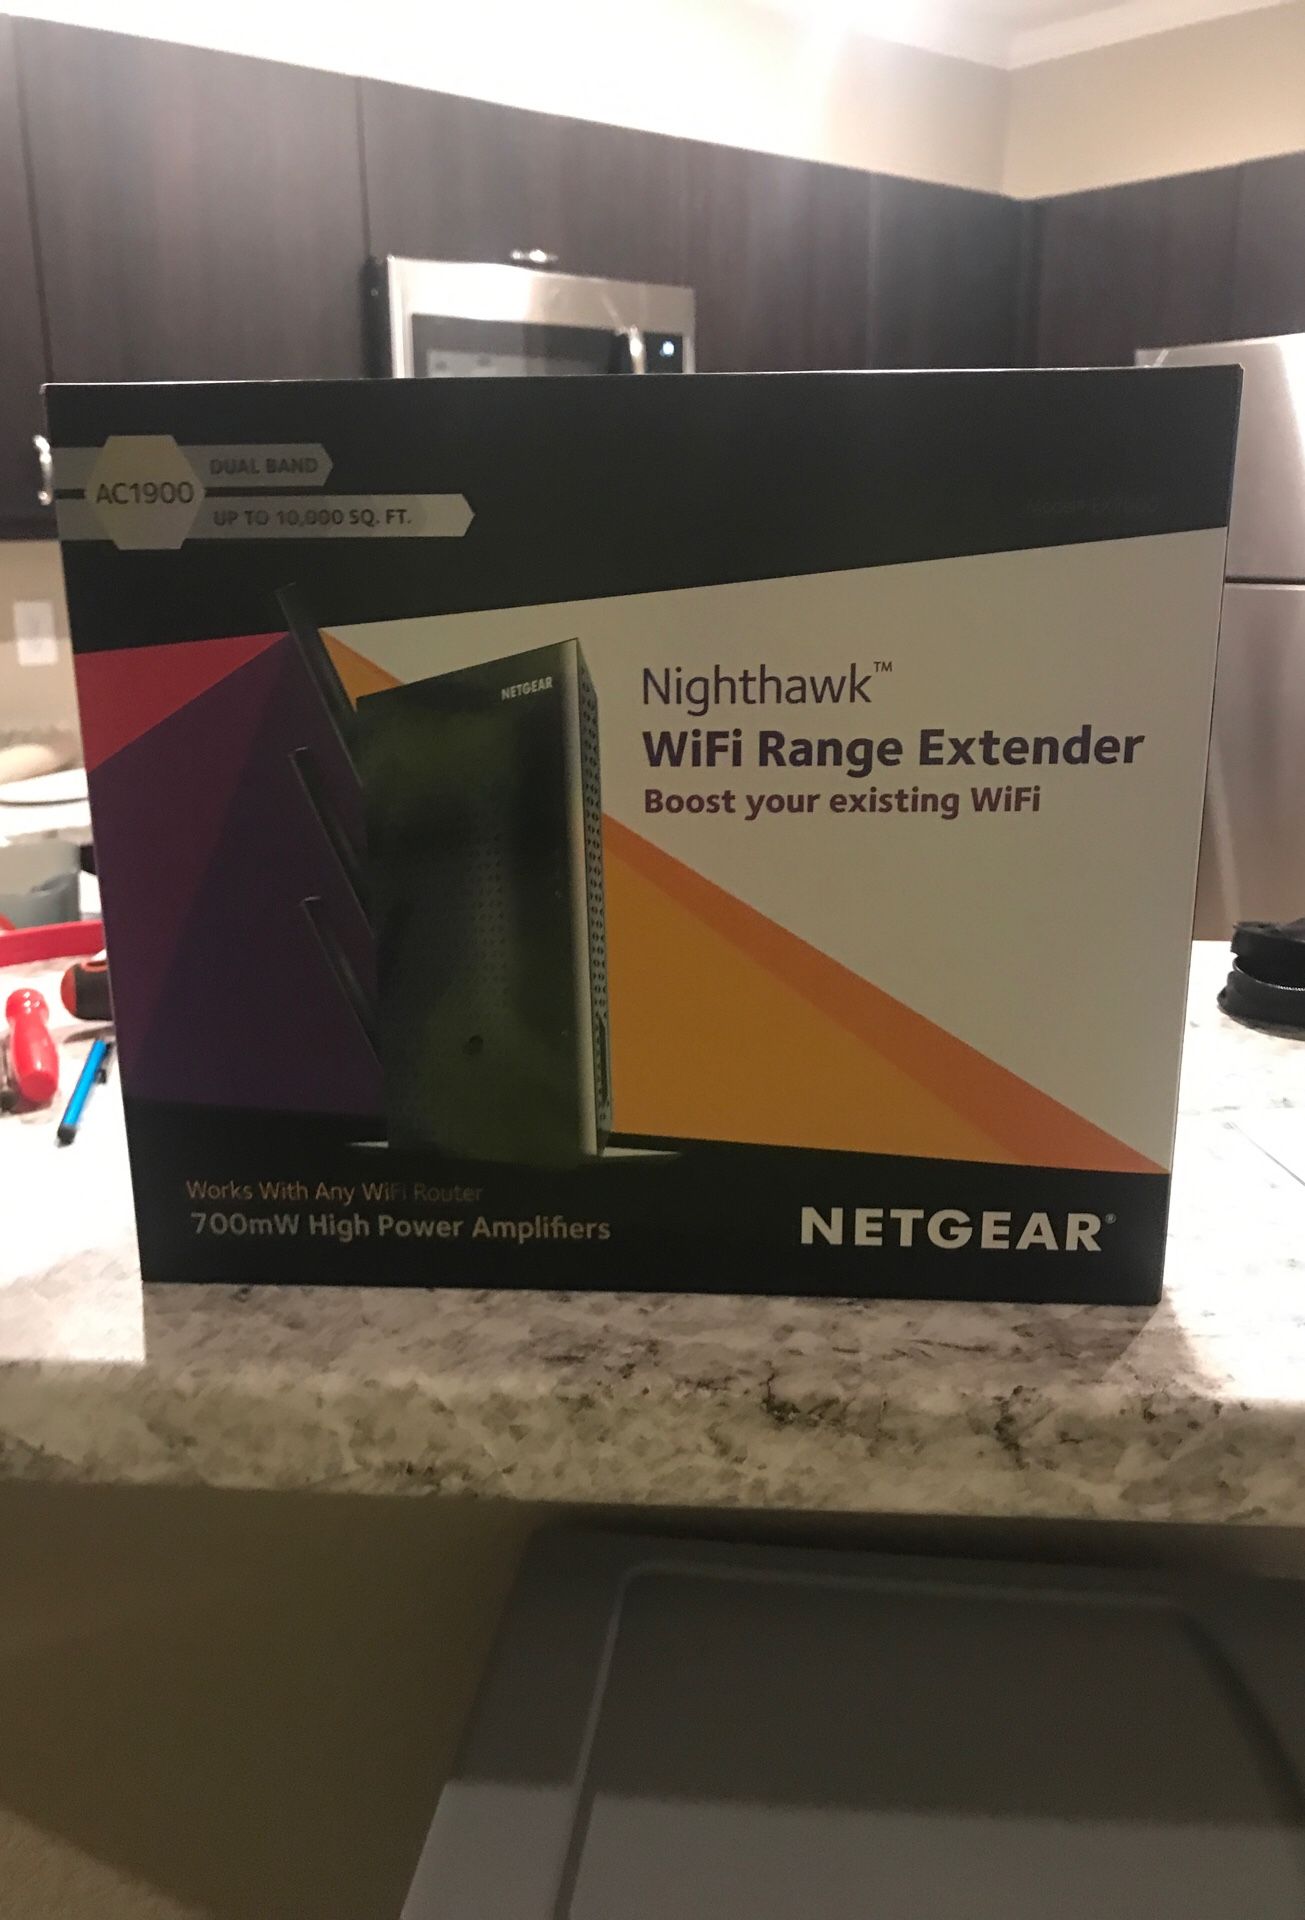 Internet módem/router with WiFi extender almost new ,used for two weeks and don’t need it anymore